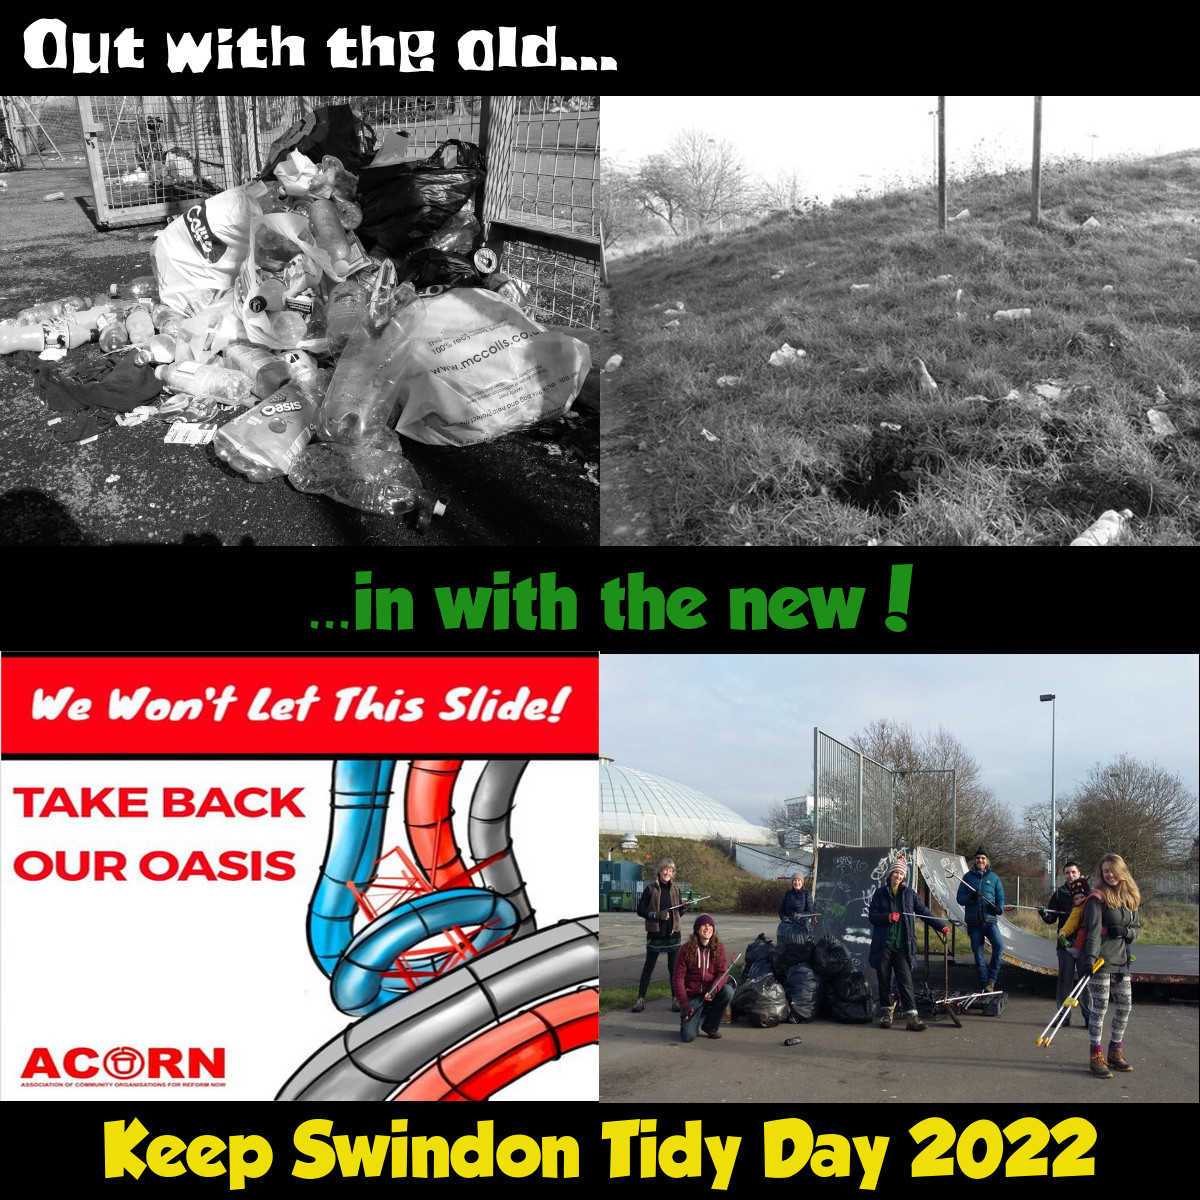 Reads, 'Out with the old, in with the new, Westlea community support Keep Swindon Tidy Day 2022'.  Top half shows takeaway litter.  Bottom half shows a group of litter pickers stood by a bus stop with bags and pickers.